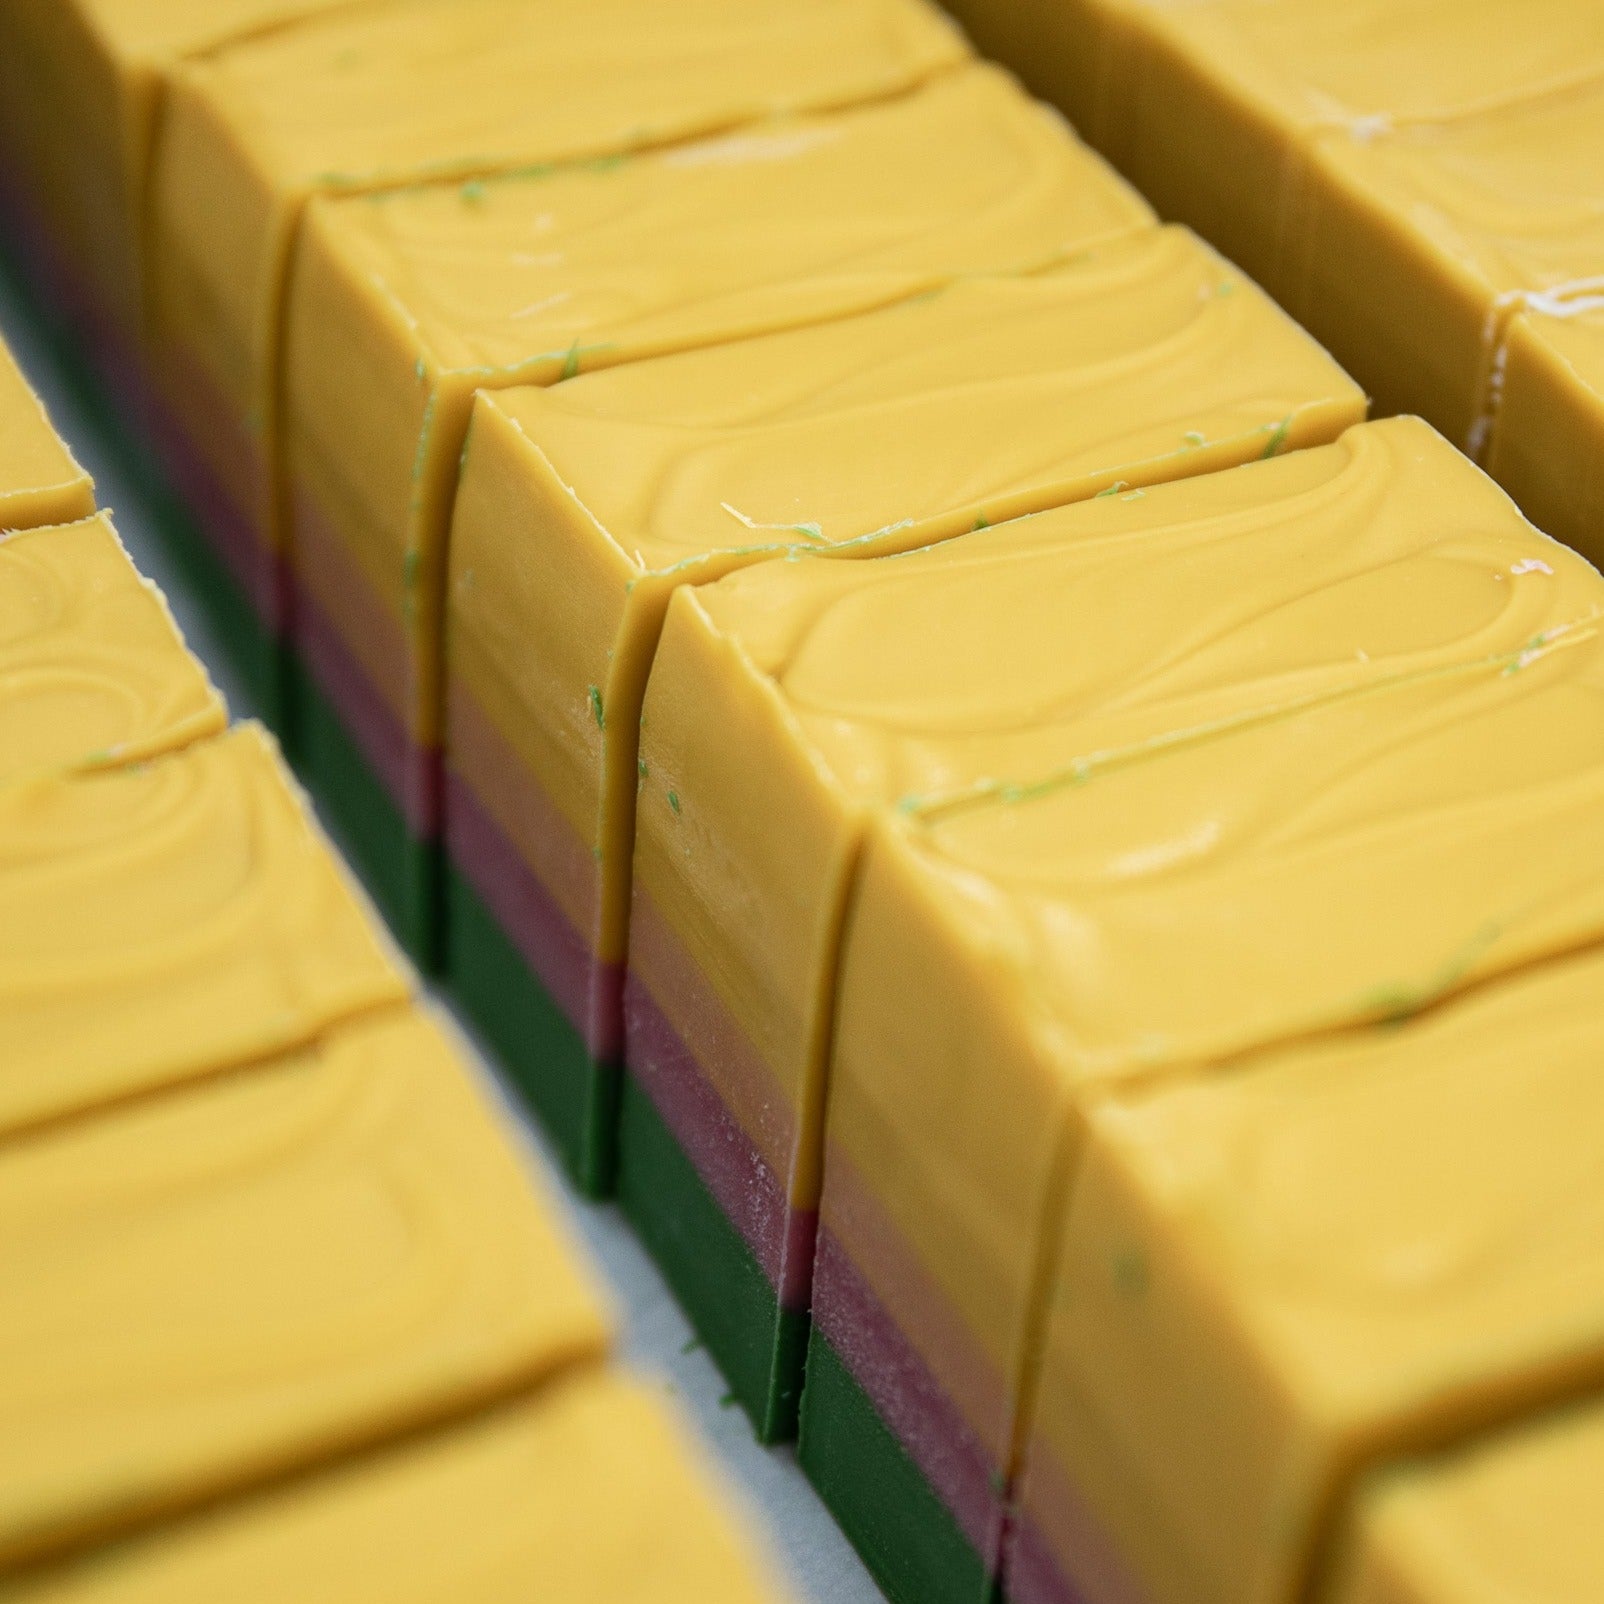 Rows of Cactus Flower soap bars.